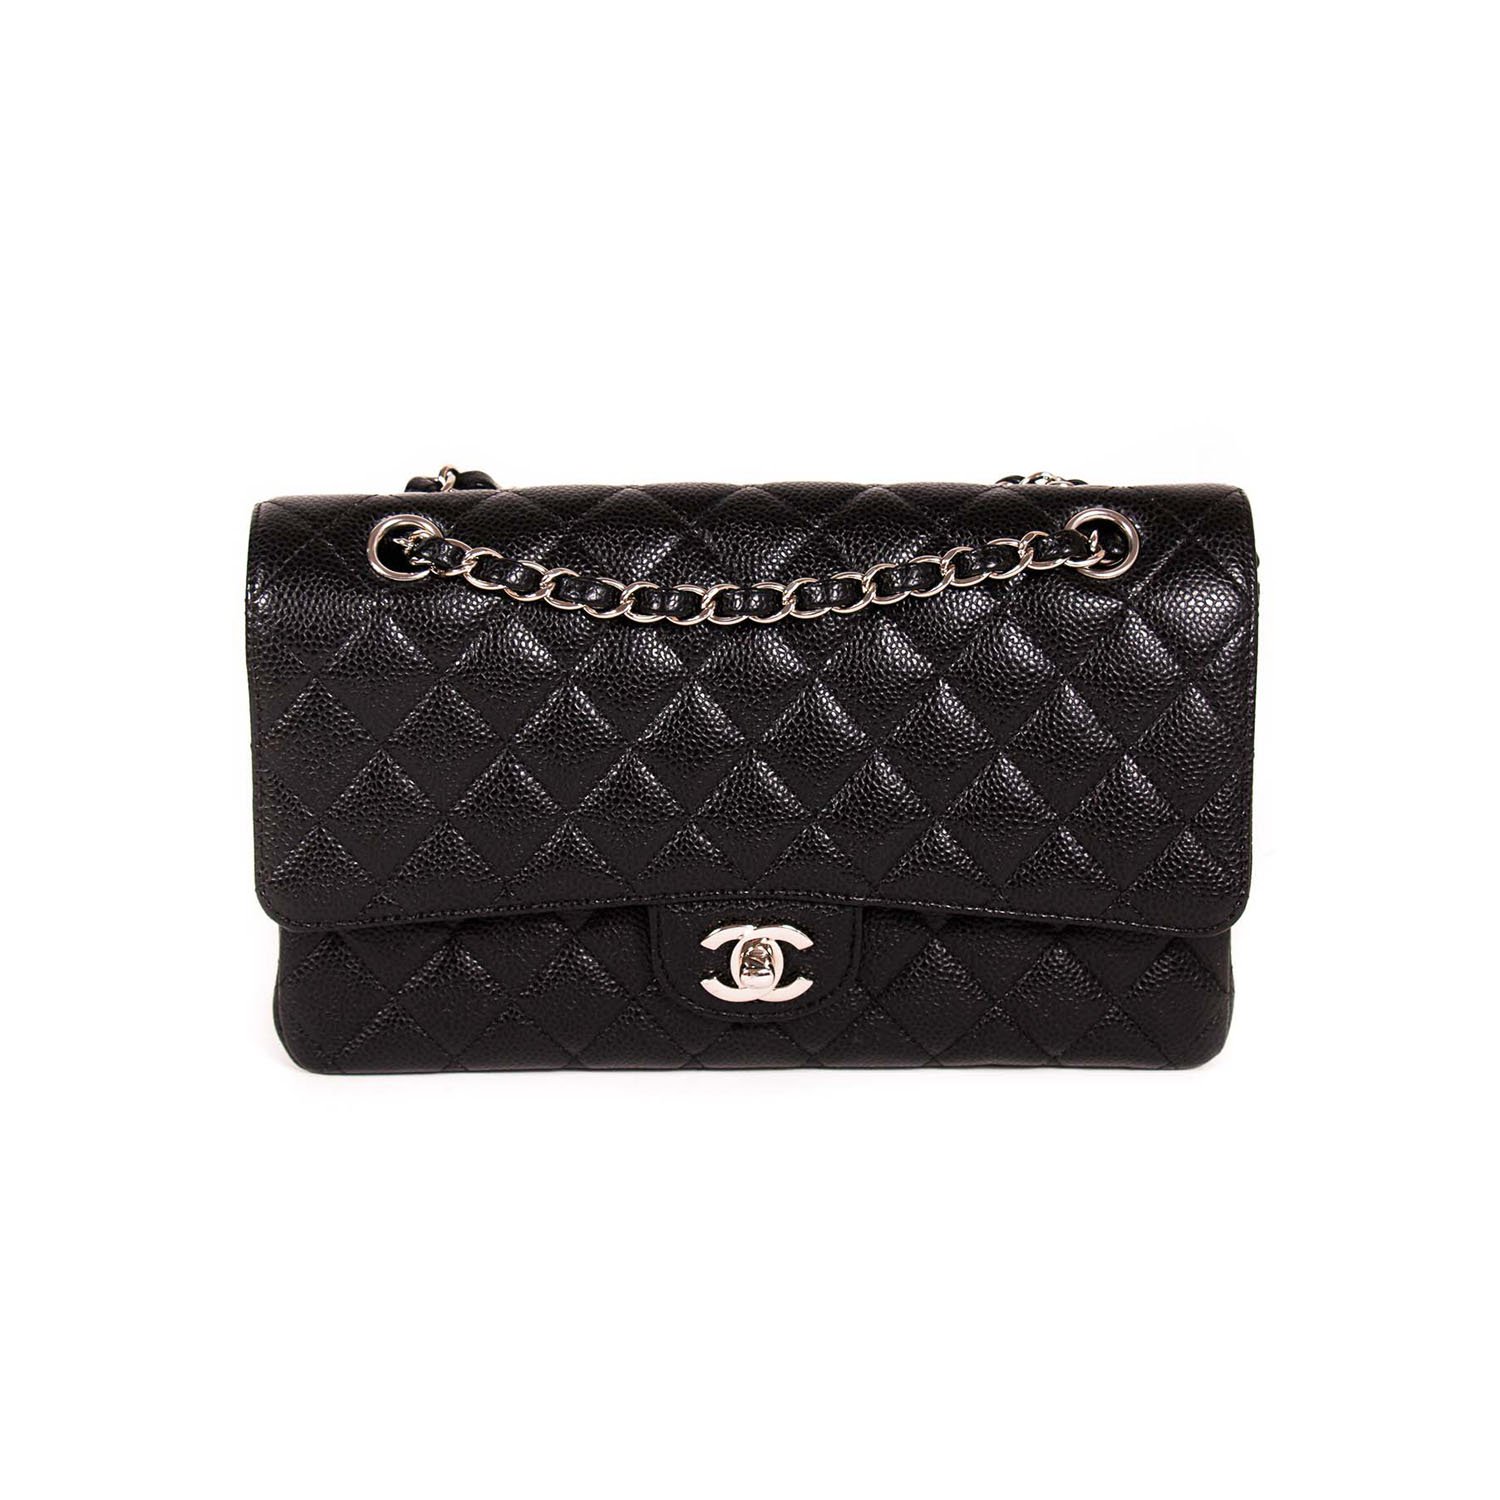 Chanel Black Quilted Caviar Leather Medium Double Flap Bag